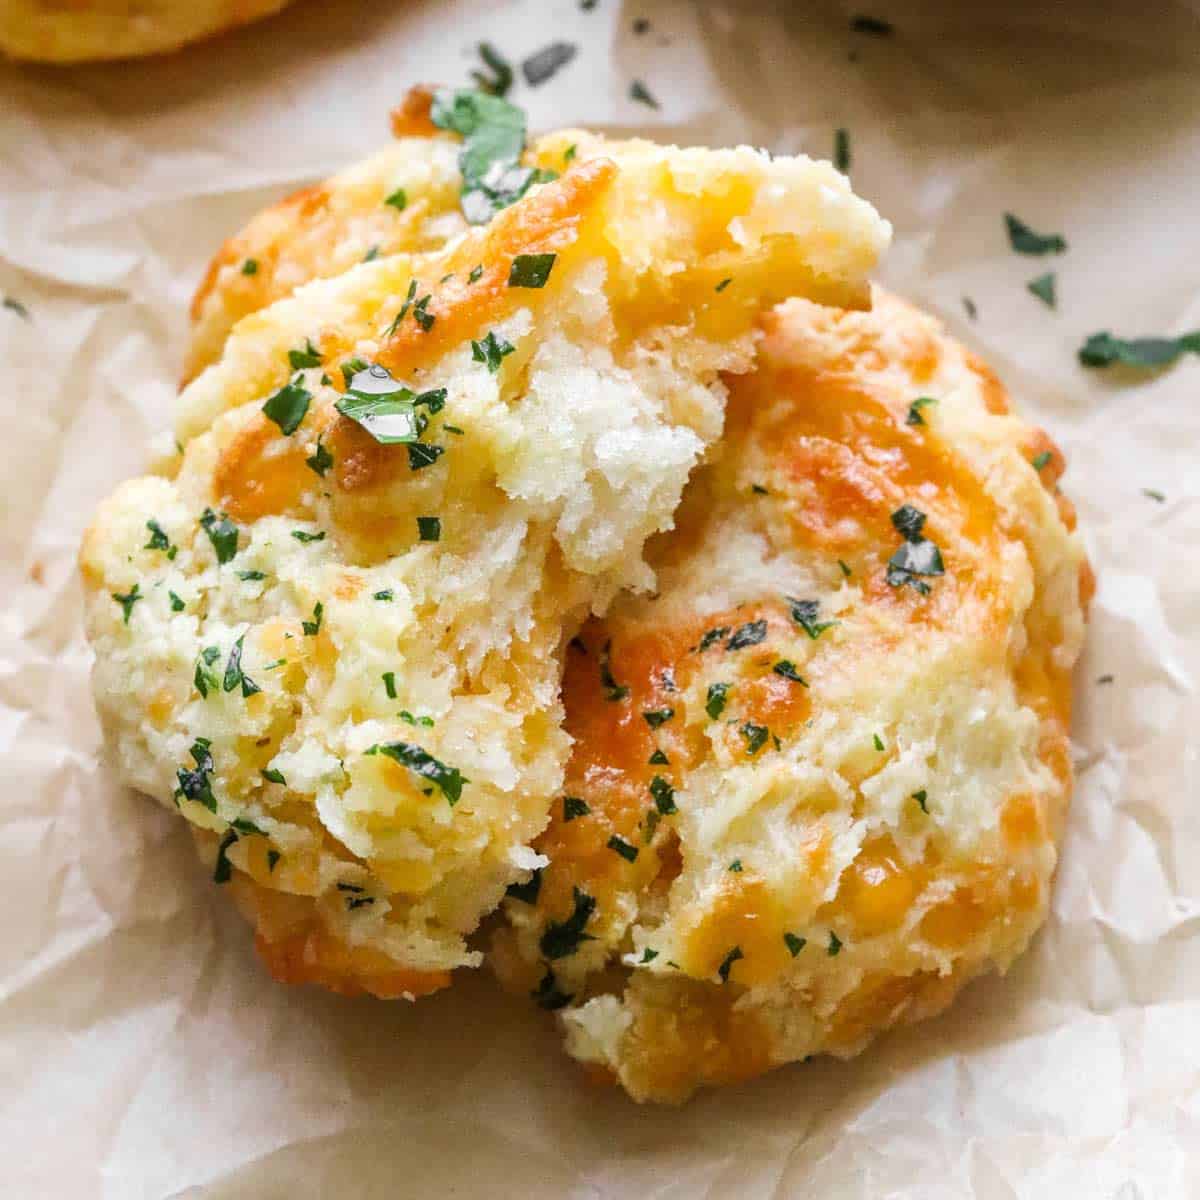 https://www.thechunkychef.com/wp-content/uploads/2021/04/Copycat-Cheddar-Bay-Biscuits-recipe.jpg